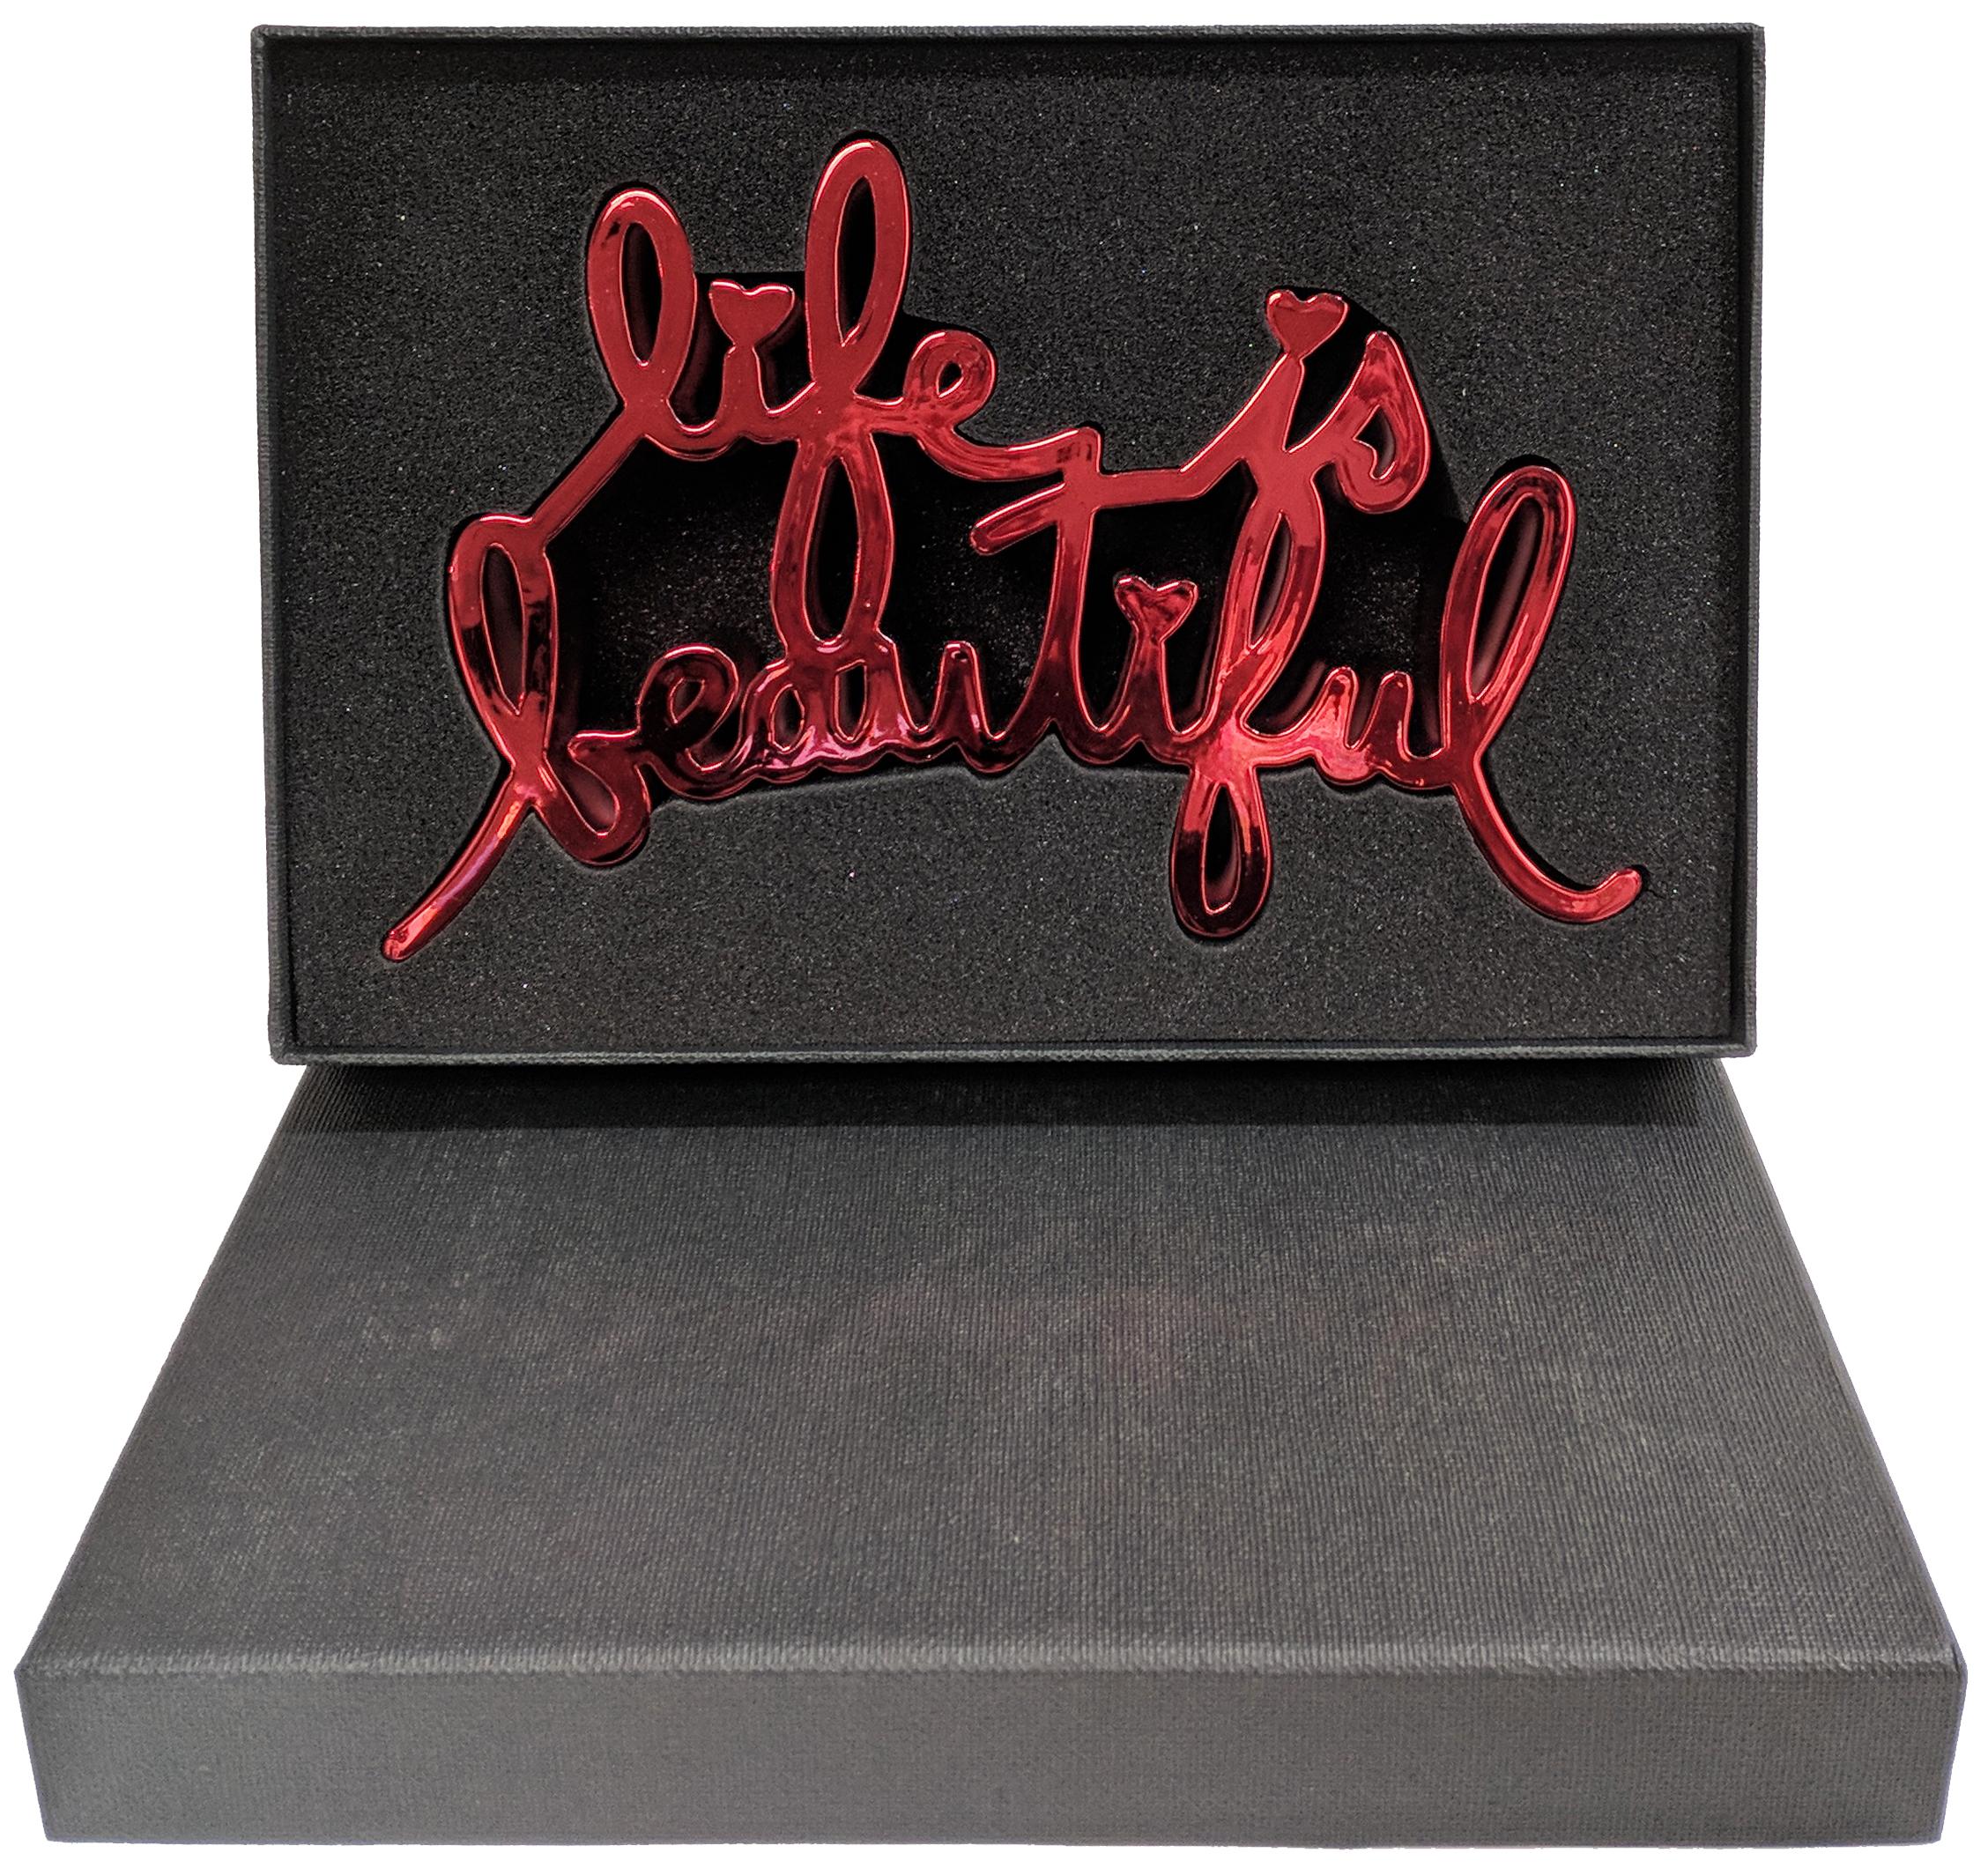 LIFE IS BEAUTIFUL (HARD CANDY RED) - Black Abstract Sculpture by Mr Brainwash